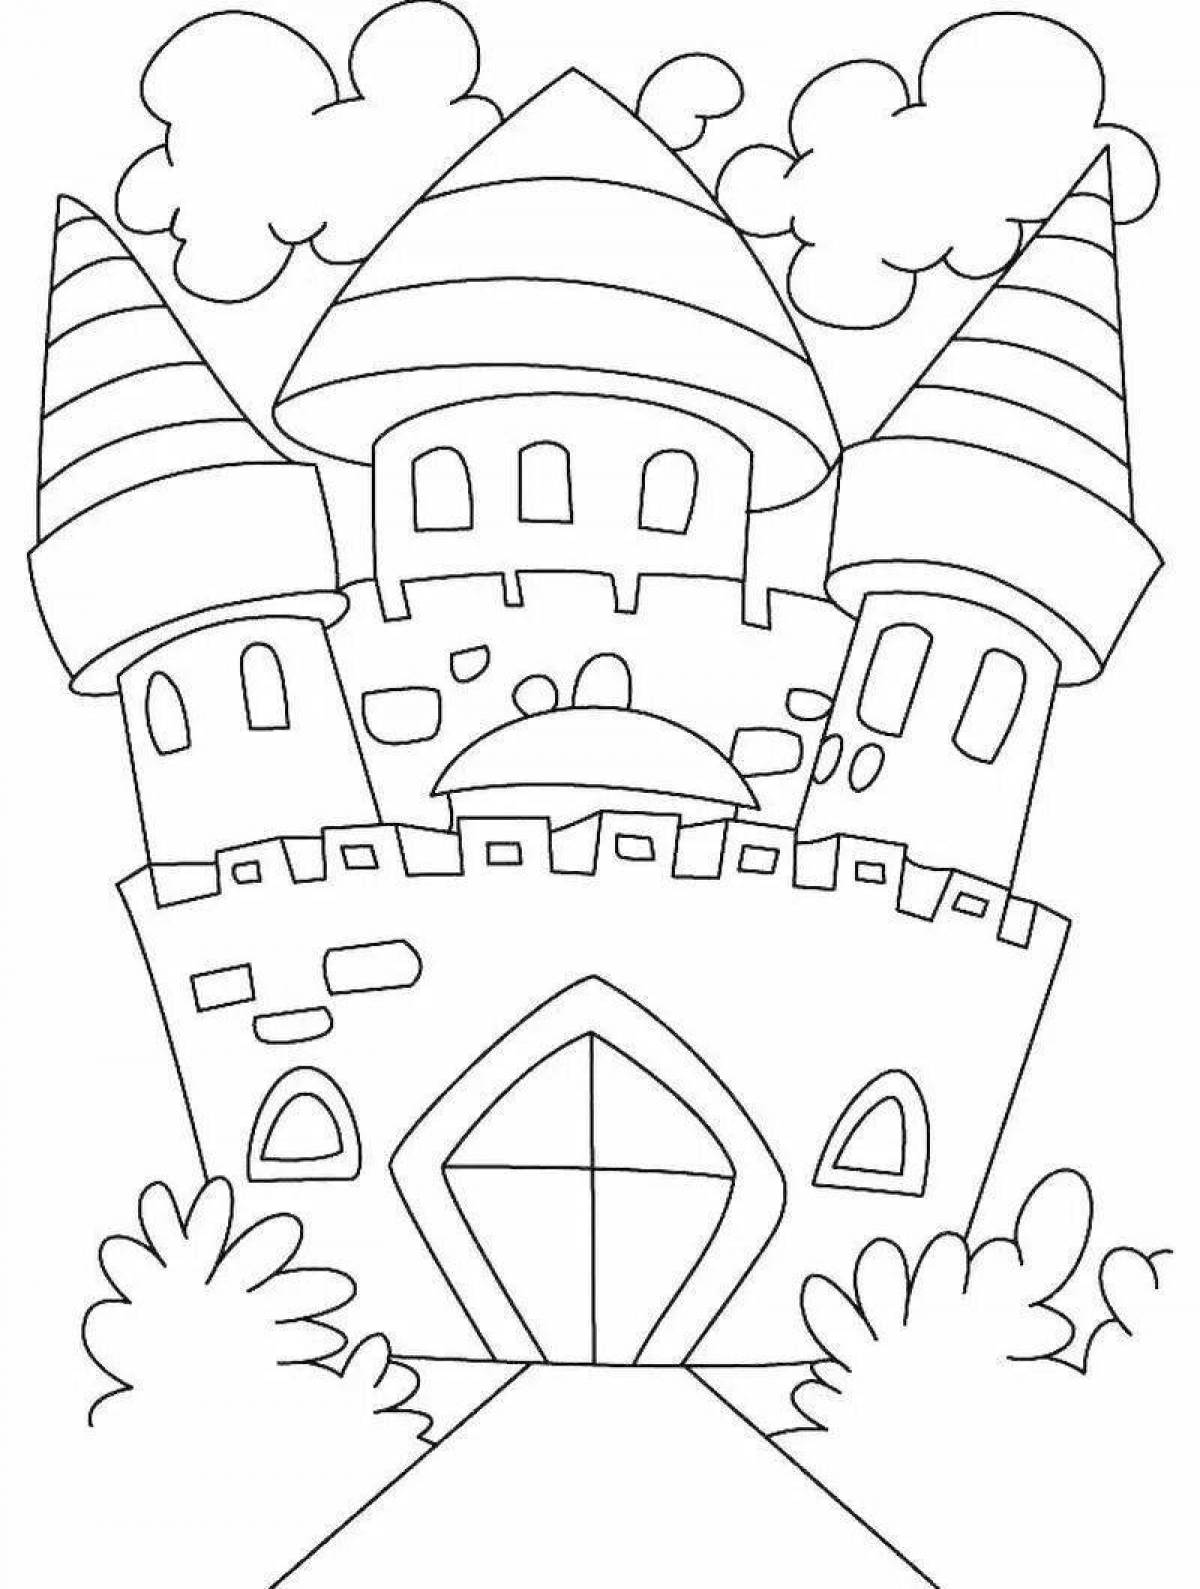 Exquisite princess house coloring book for kids